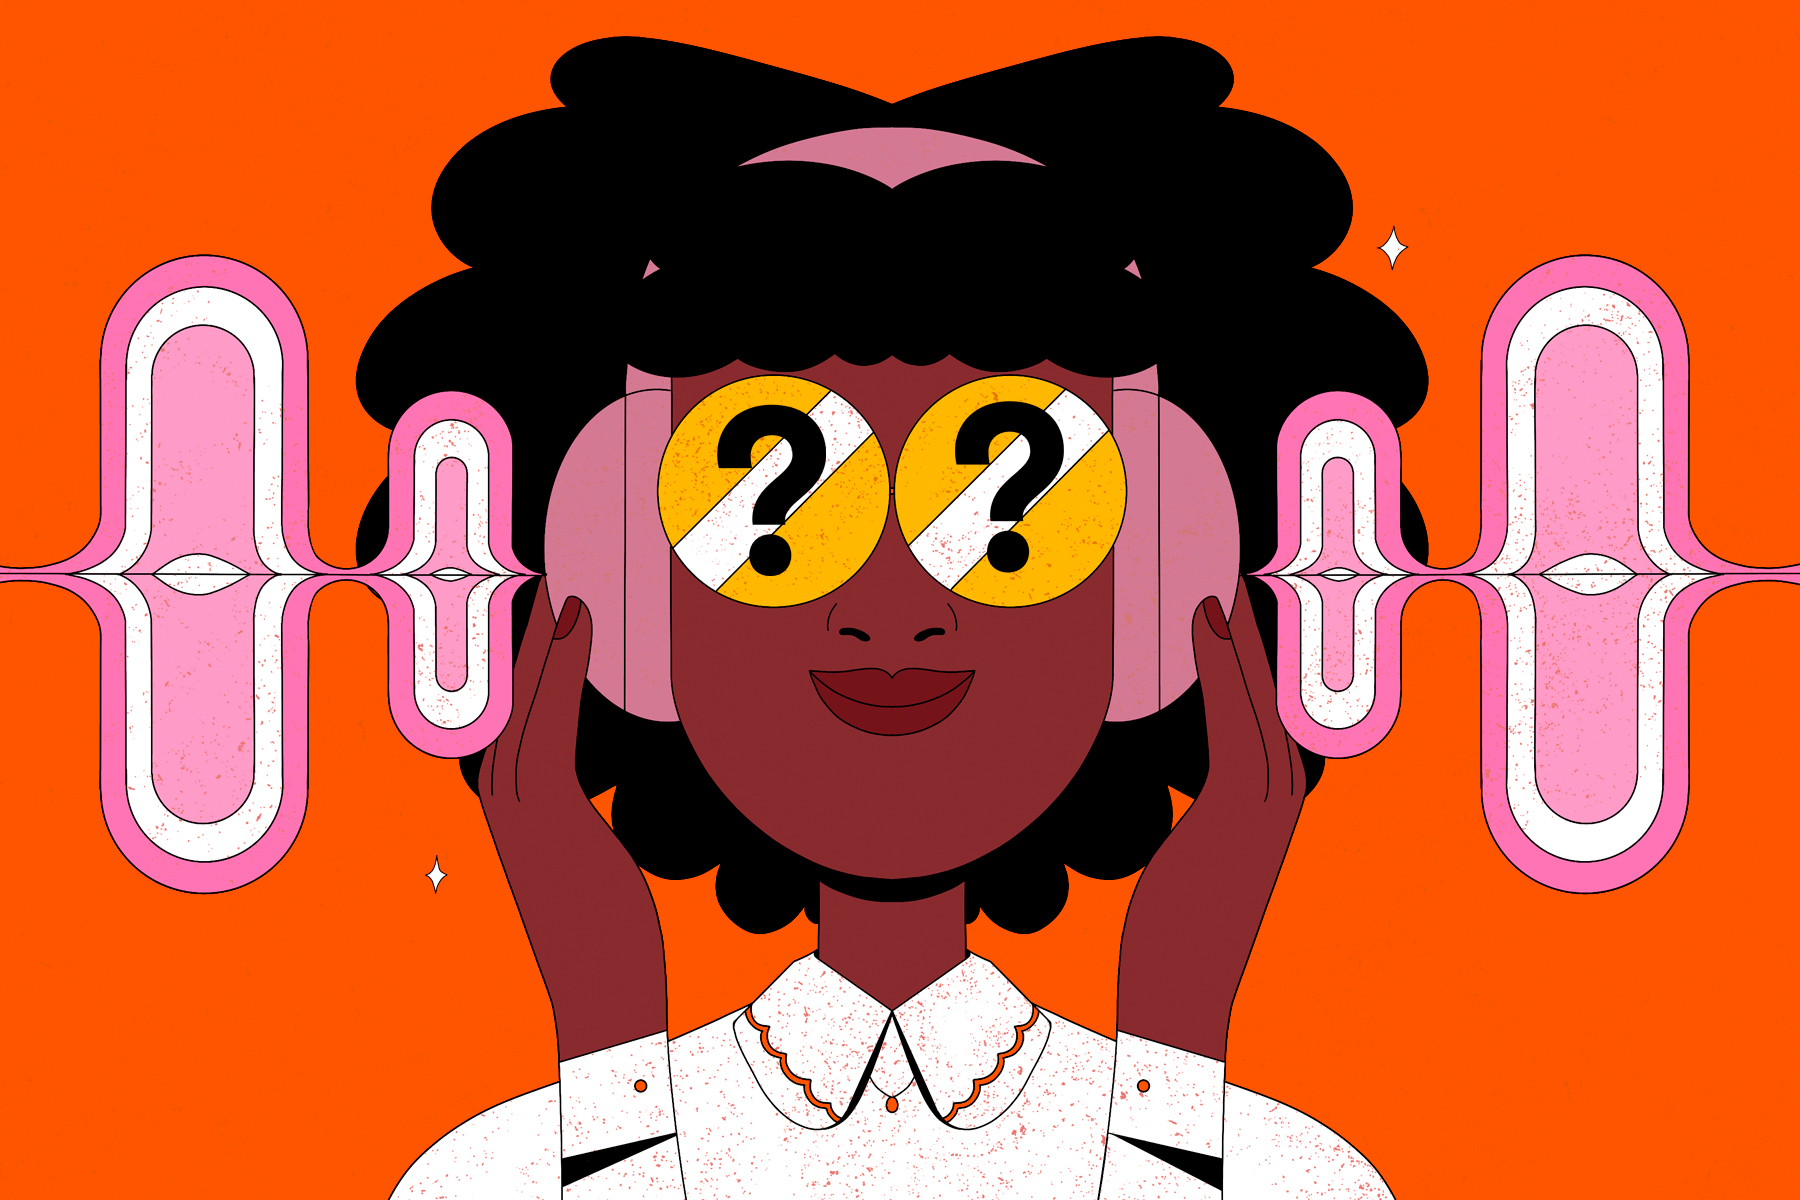 An illustration of a Black woman's head and shoulders; she is holding a pair of large headphones over her ears. She is wearing yellow glasses with large black question marks on them and the background is a bright orange. 